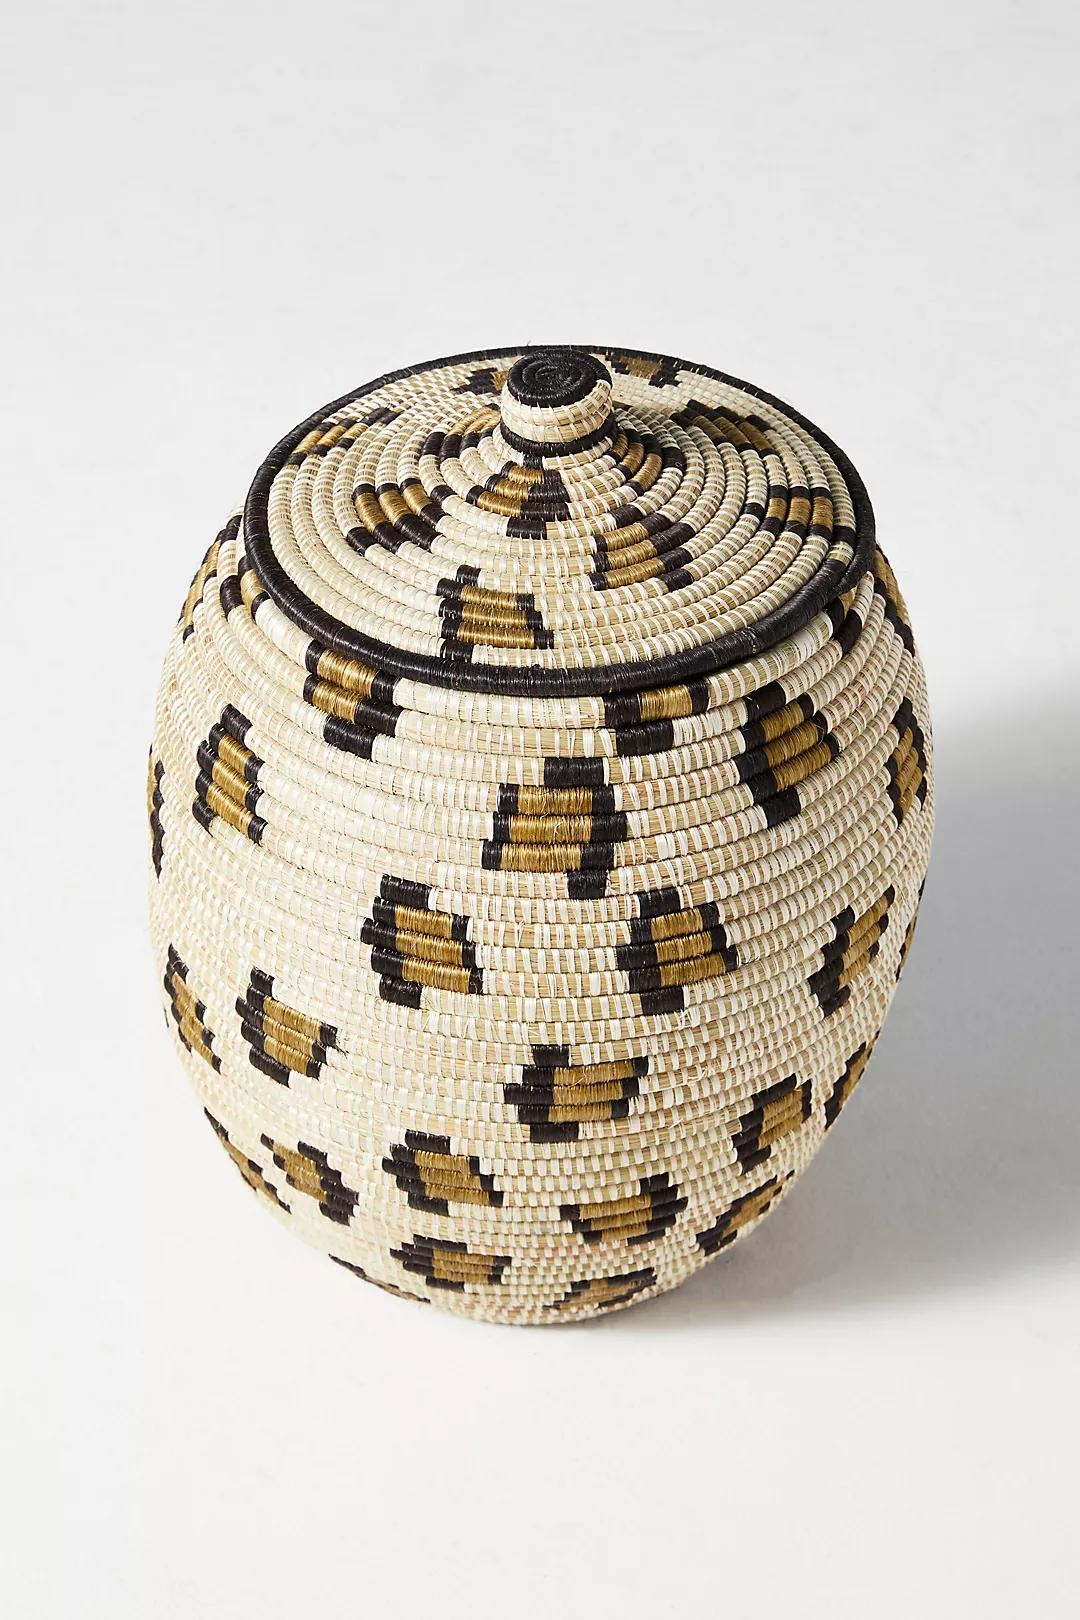 Cheetah Lidded Basket By All Across Africa, Beige, Large - Image 0